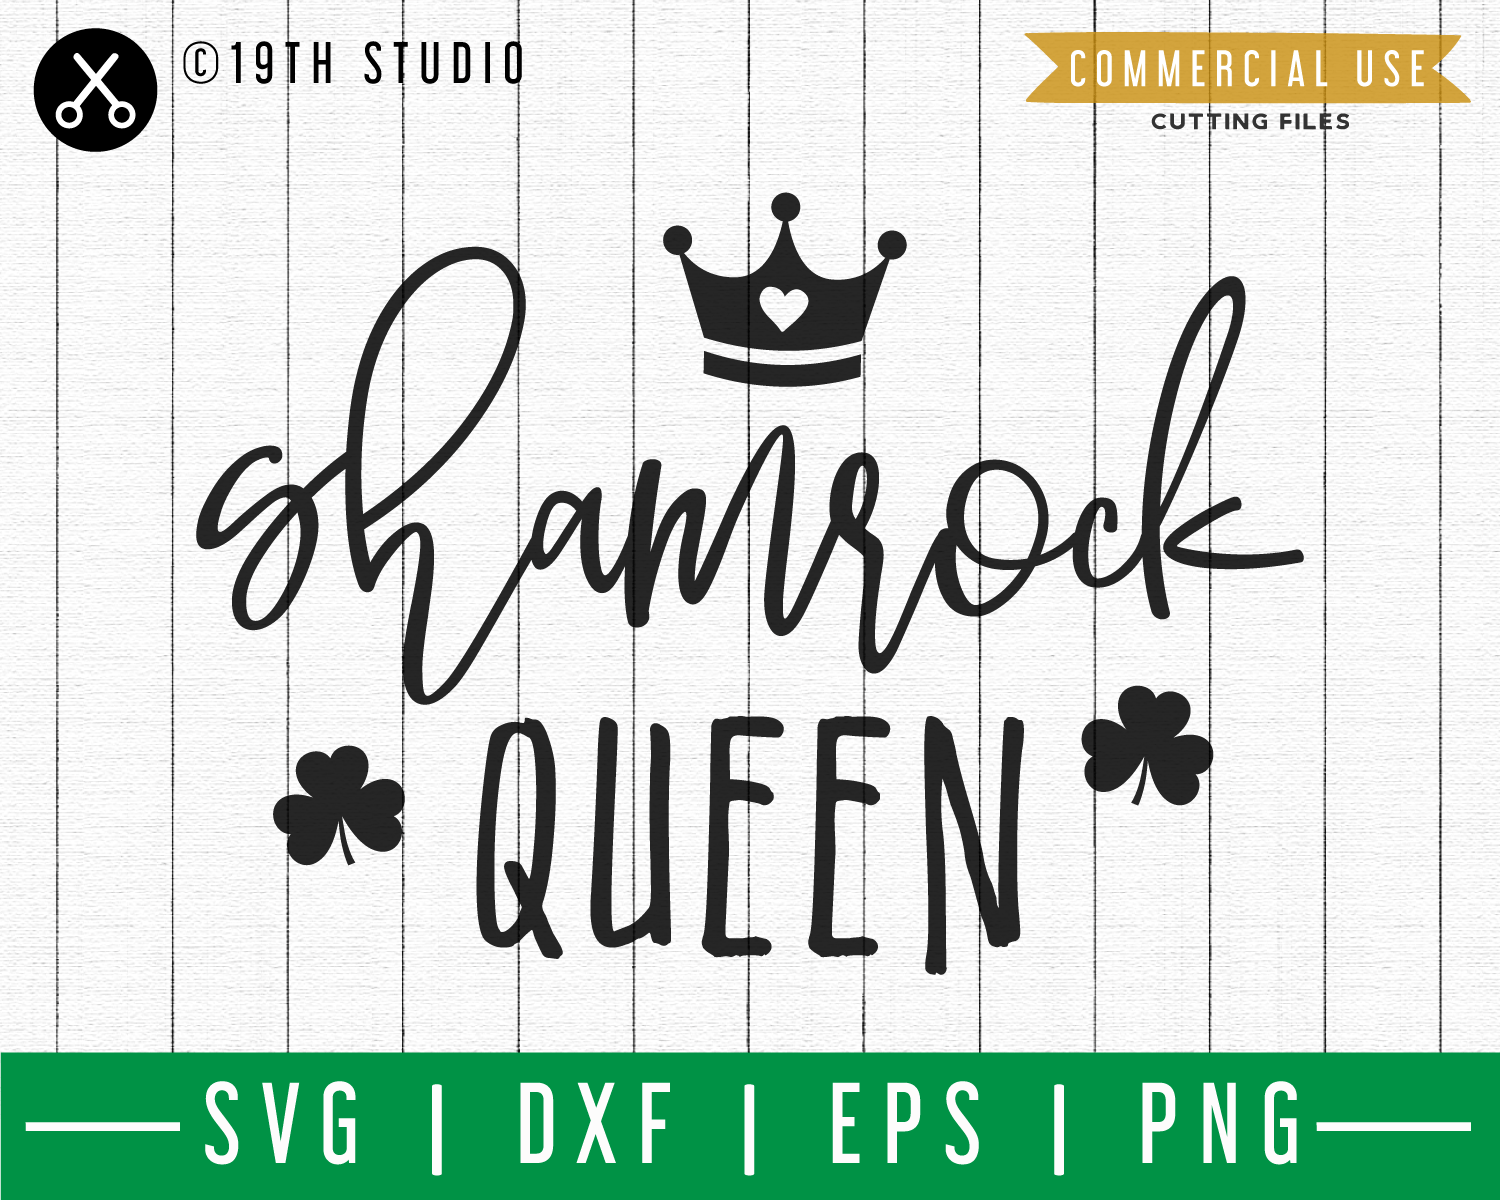 Shamrock queen SVG | A St. Patrick's Day SVG cut file M45F Craft House SVG - SVG files for Cricut and Silhouette